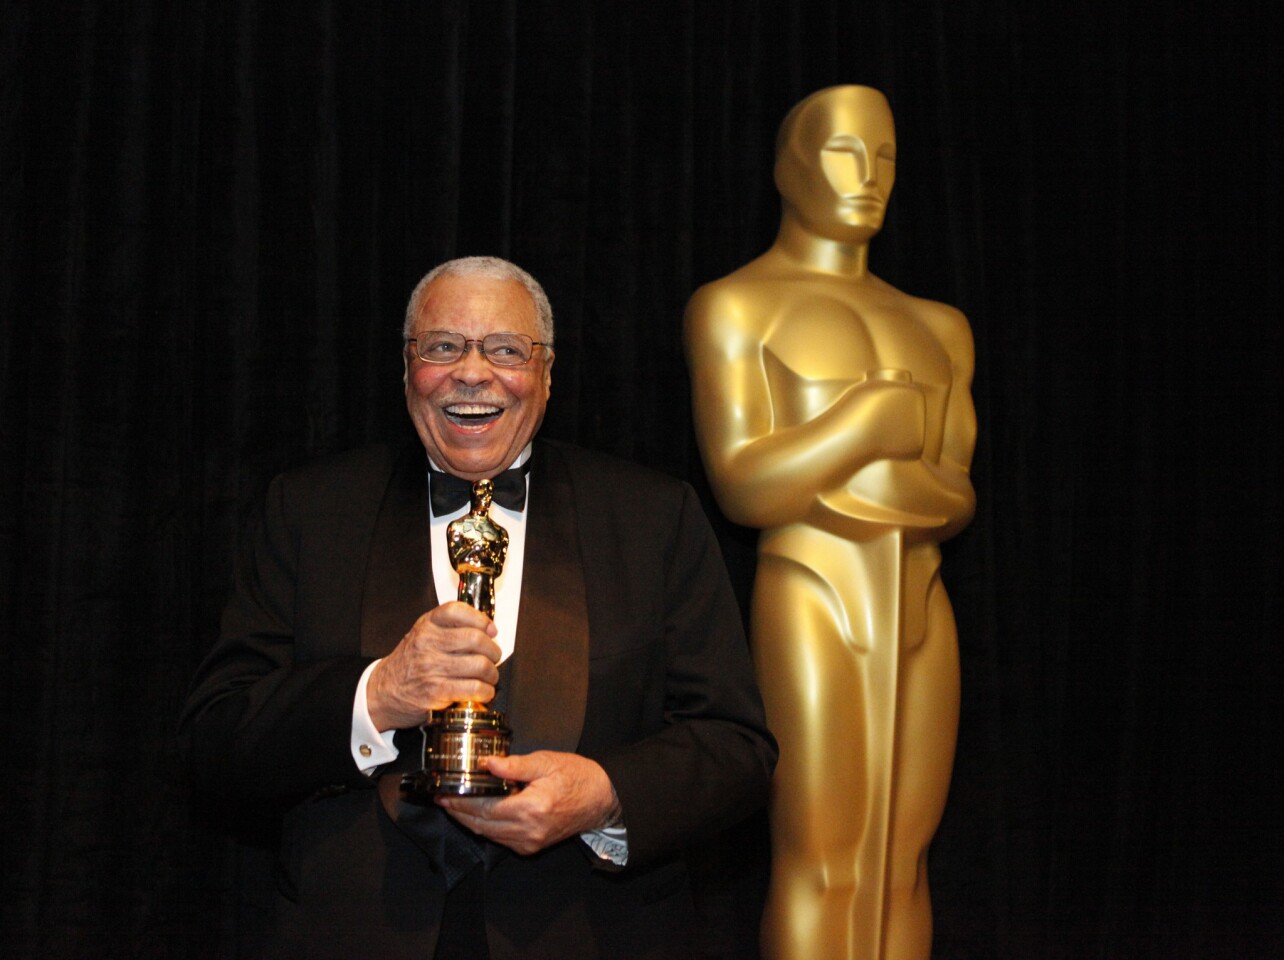 The Tony and Emmy Award-winning actor and the voice of "Star Wars'" Darth Vader earned a lead actor nomination reprising his Broadway triumph in 1970's "The Great White Hope" as a black boxer who keeps winning over white opponents in the years prior to World War I. Three years ago, he earned an honorary Academy Award for "his legacy of consistent excellence and uncommon versatility."